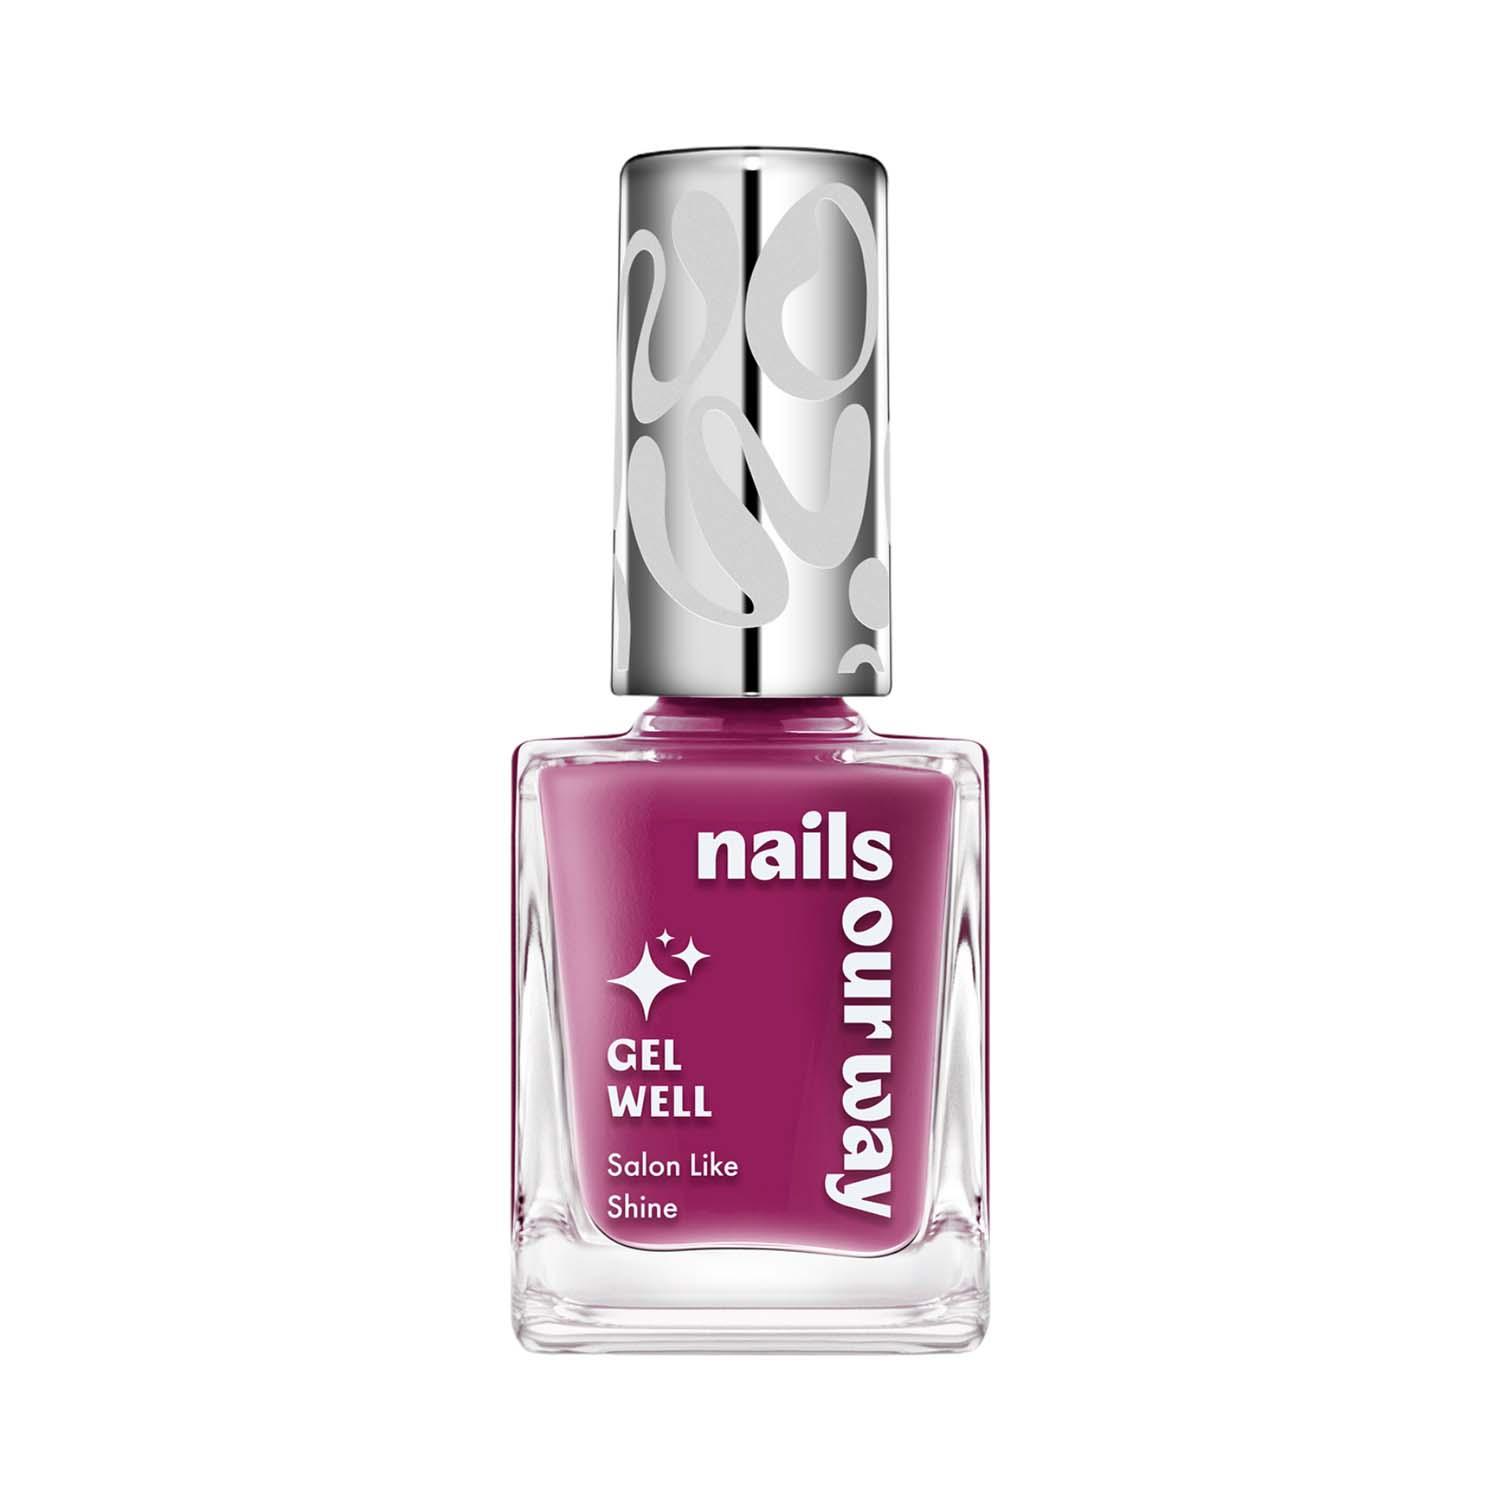 Nails Our Way | Nails Our Way Gel Well Nail Enamel - 212 Elegant (10 ml)